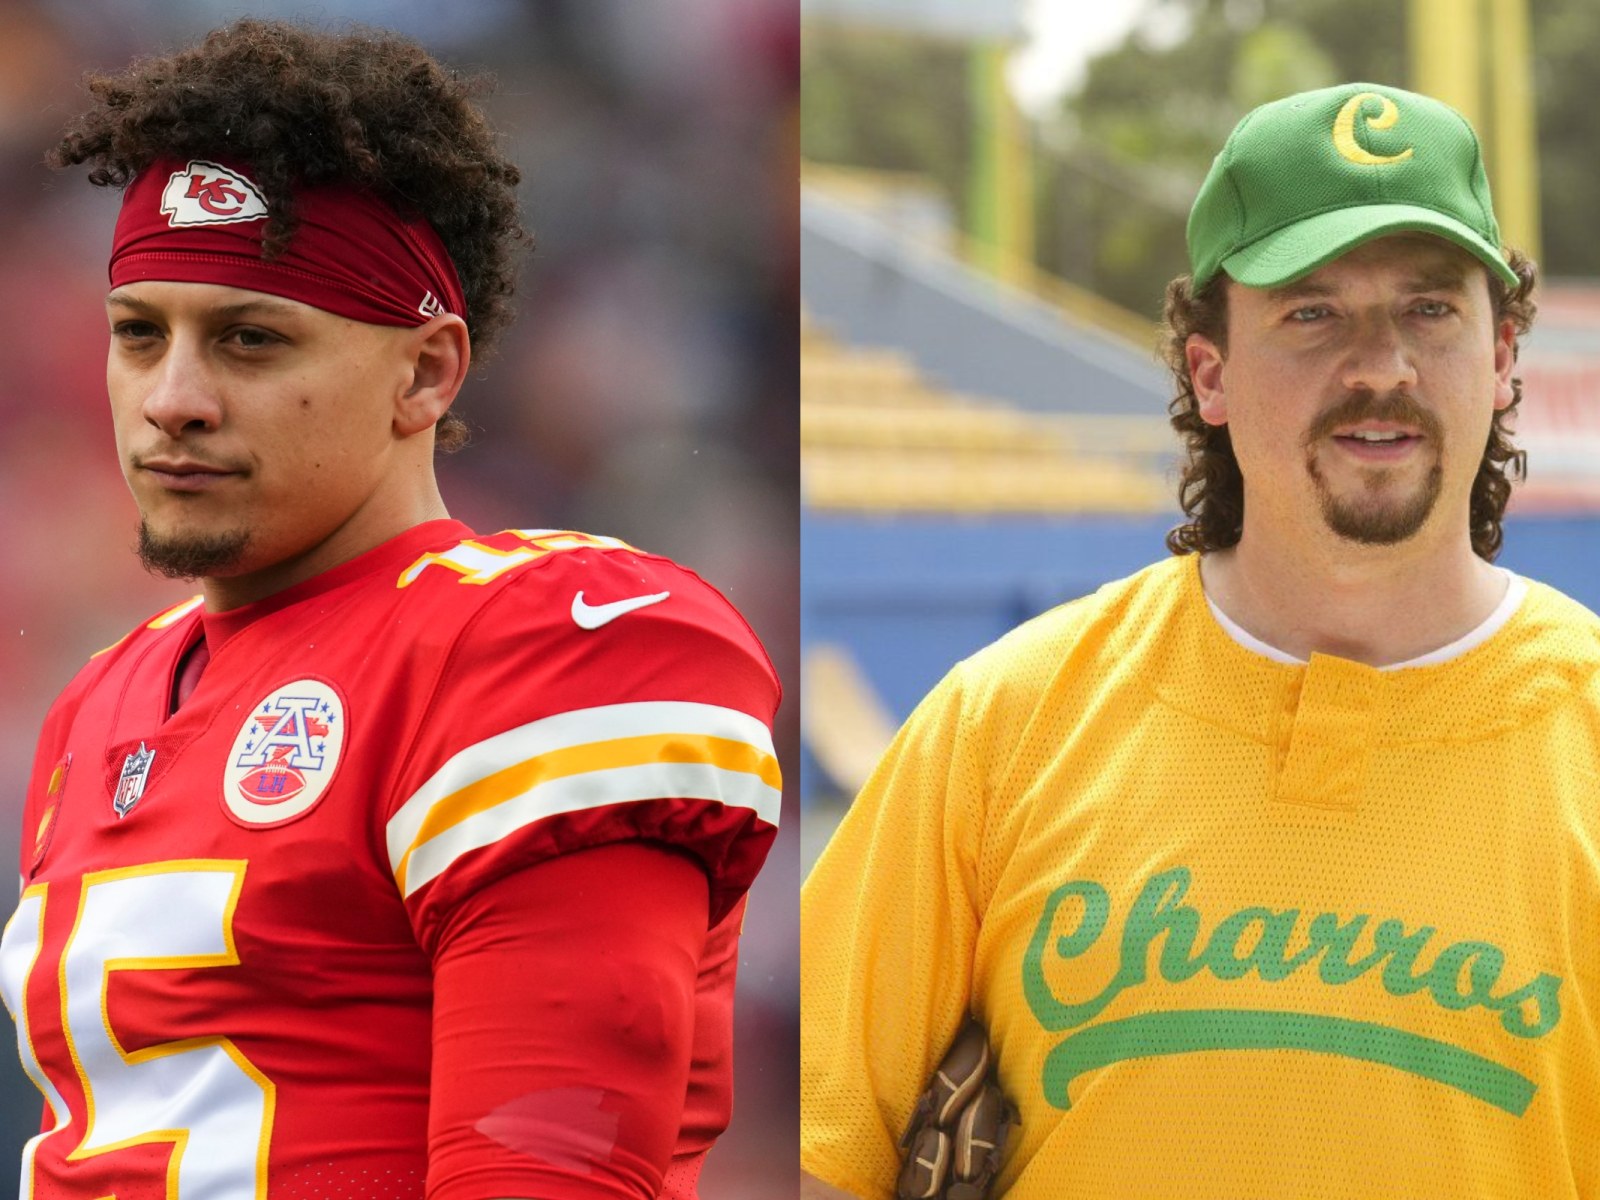 Patrick Mahomes Is Being Compared to Kenny Powers of 'Eastbound & Down'